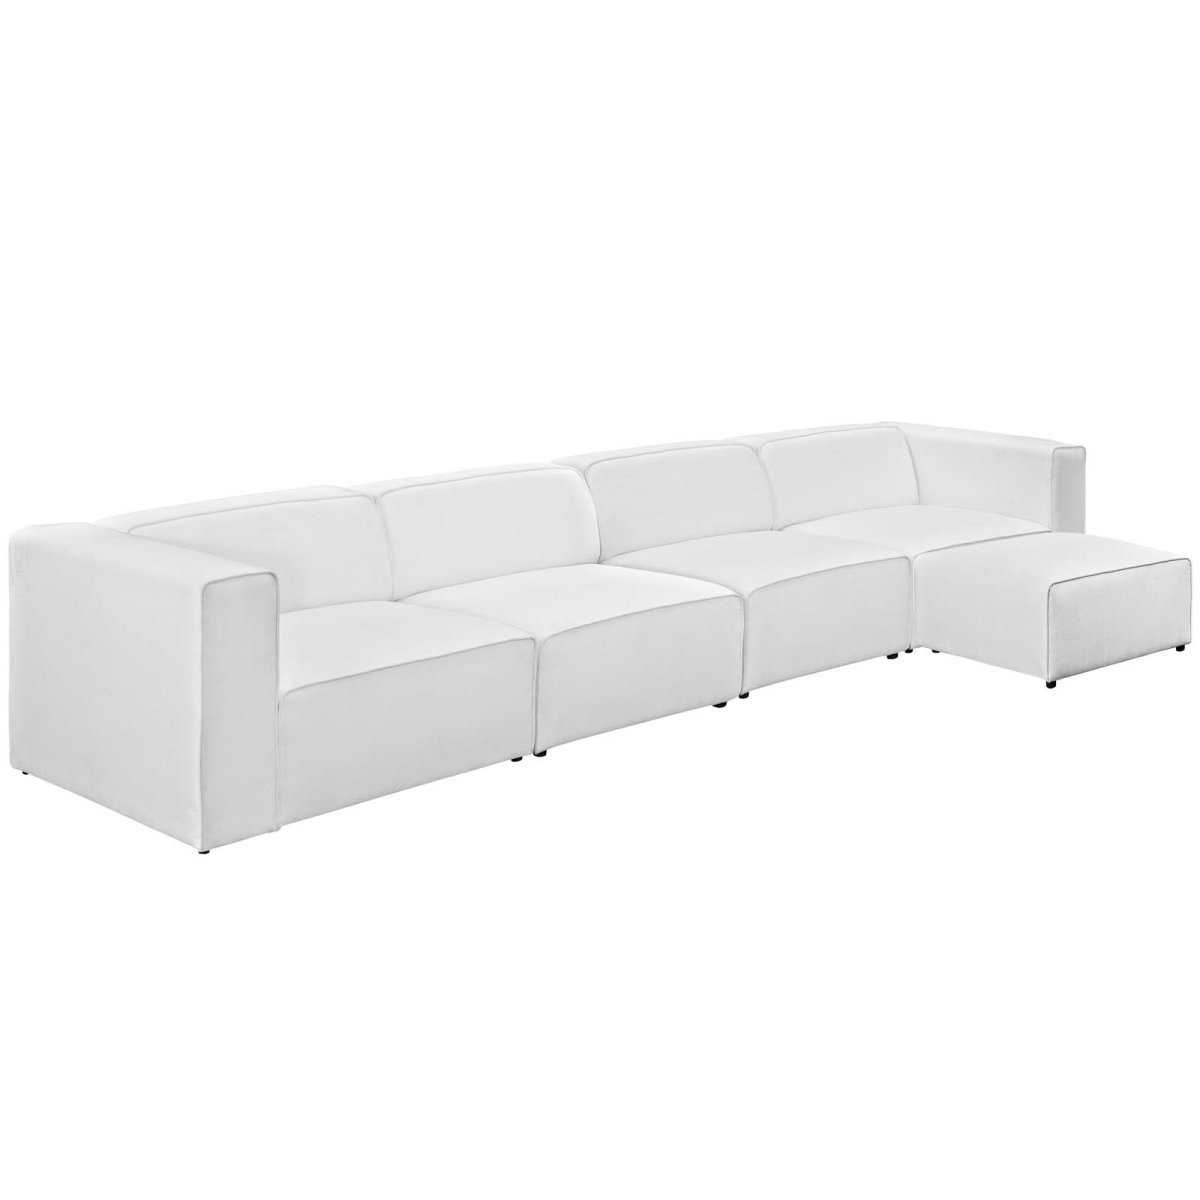 Eei-2833-whi 5 Piece Mingle Upholstered Fabric Sectional Sofa Set - White, 27 X 156 X 74.5 In.